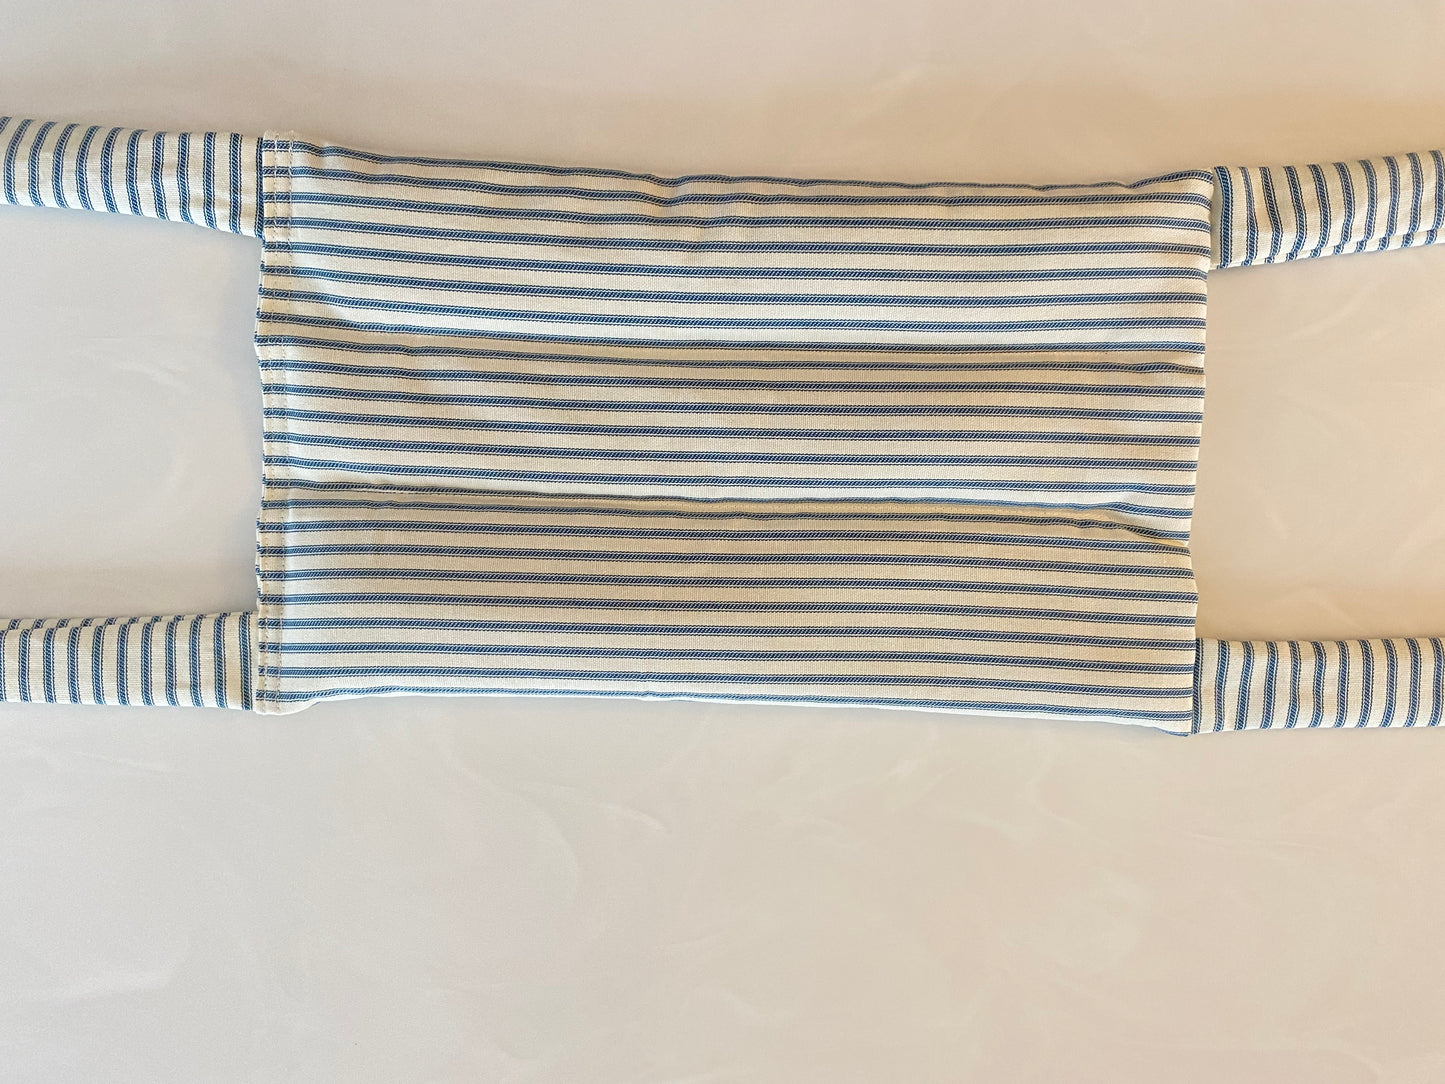 Blue Stripe Large Microwavable Rice Bag with Ties for Hands Free Use